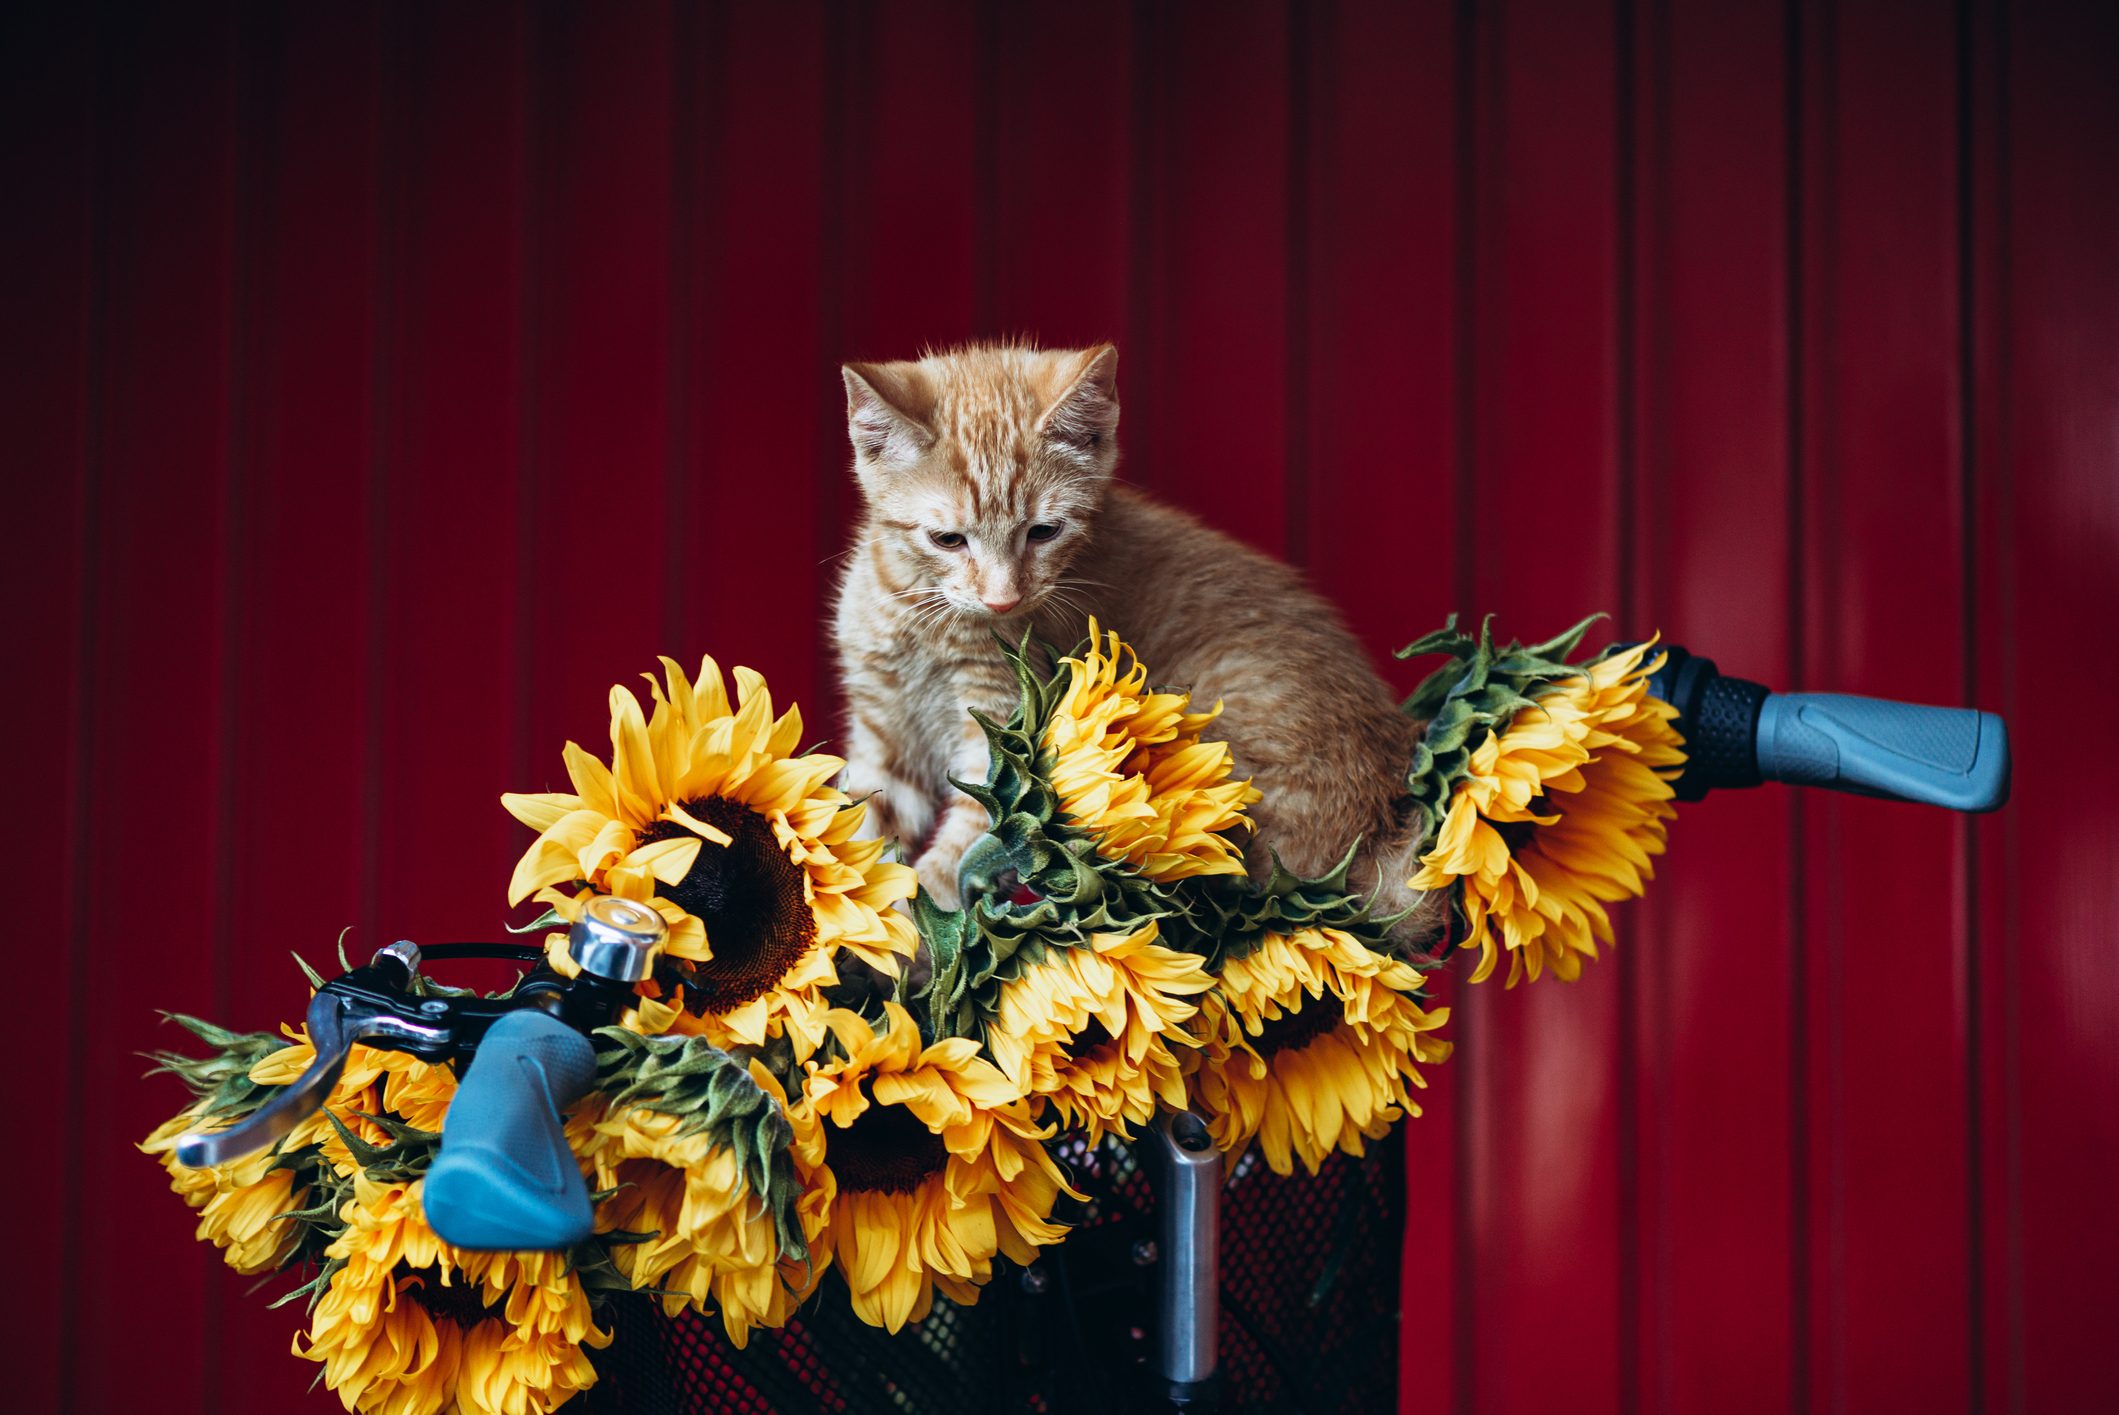 Close Up Of Vintage Framed Bicycle With Ginger Kitten And Sunflowers In Basket Standing On Red